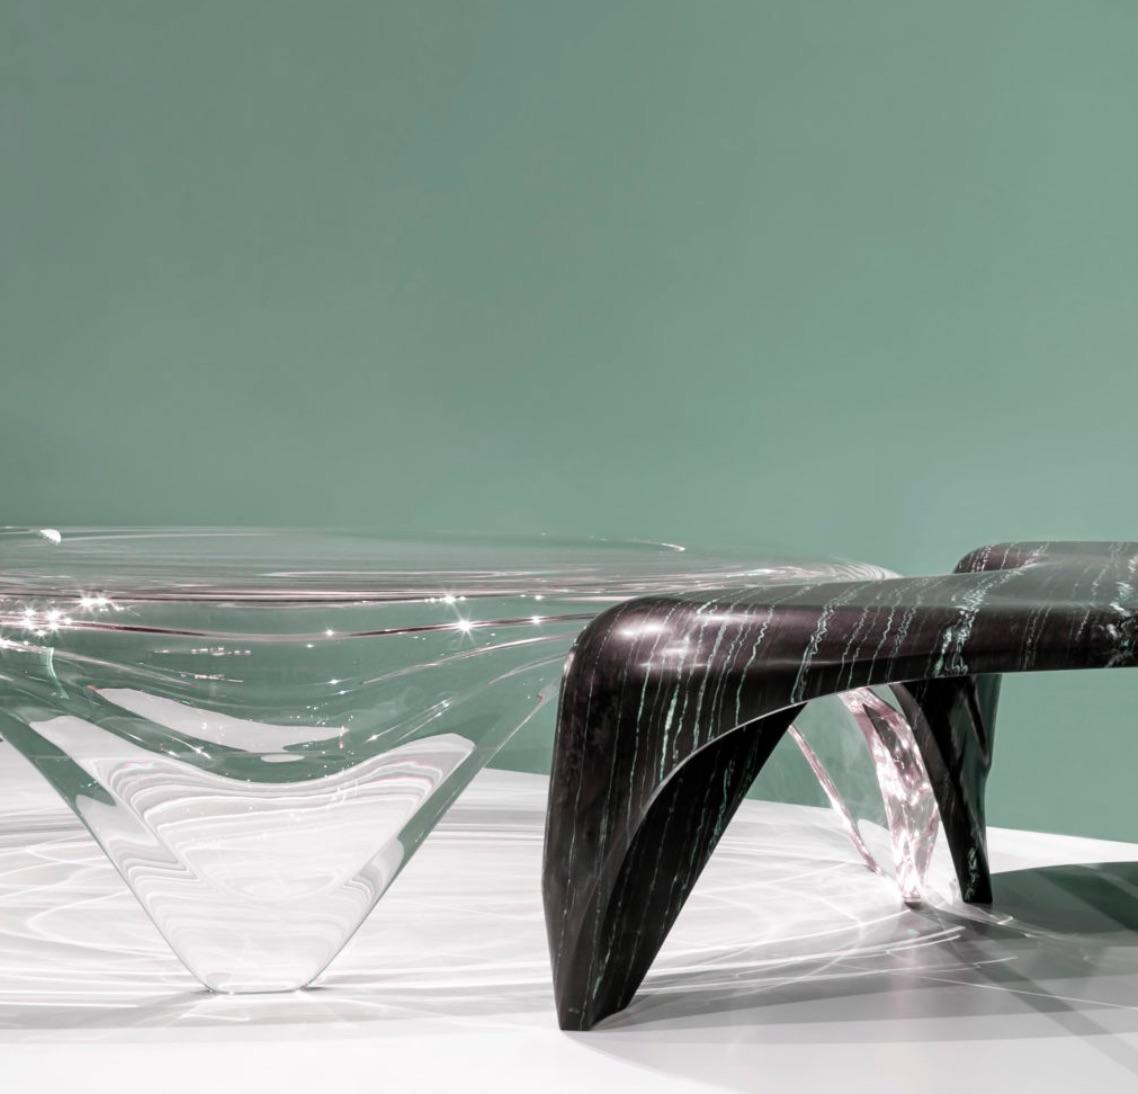 Introduced at the Salone del Mobile 2019, this limited edition table designed by Zaha Hadid in tropical storm honed marble and polished Plexiglass is sure to be a conversation piece in any interior.

Referencing coastal rock formations carved by the